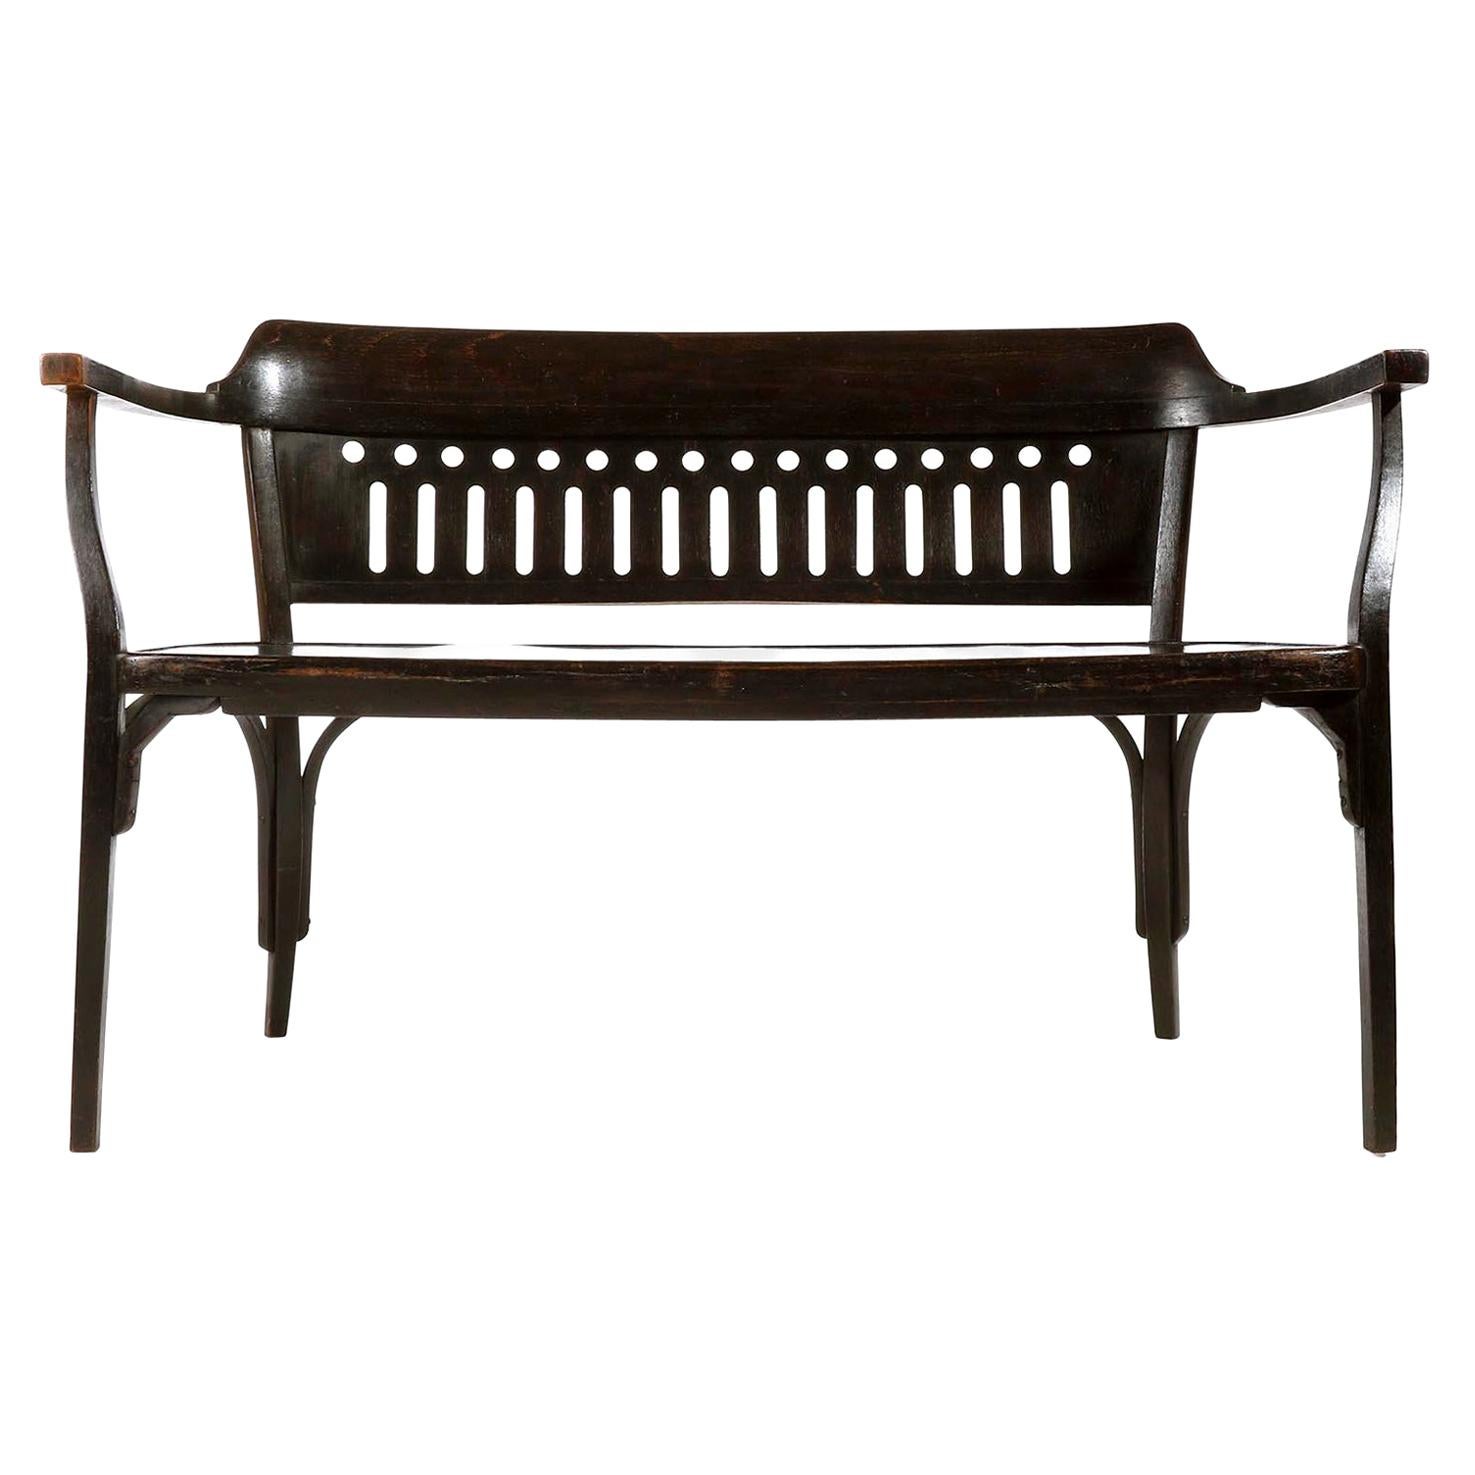 Otto Wagner Settee Bench Bentwood, Thonet, Austria, Vienna Secession, circa 1905